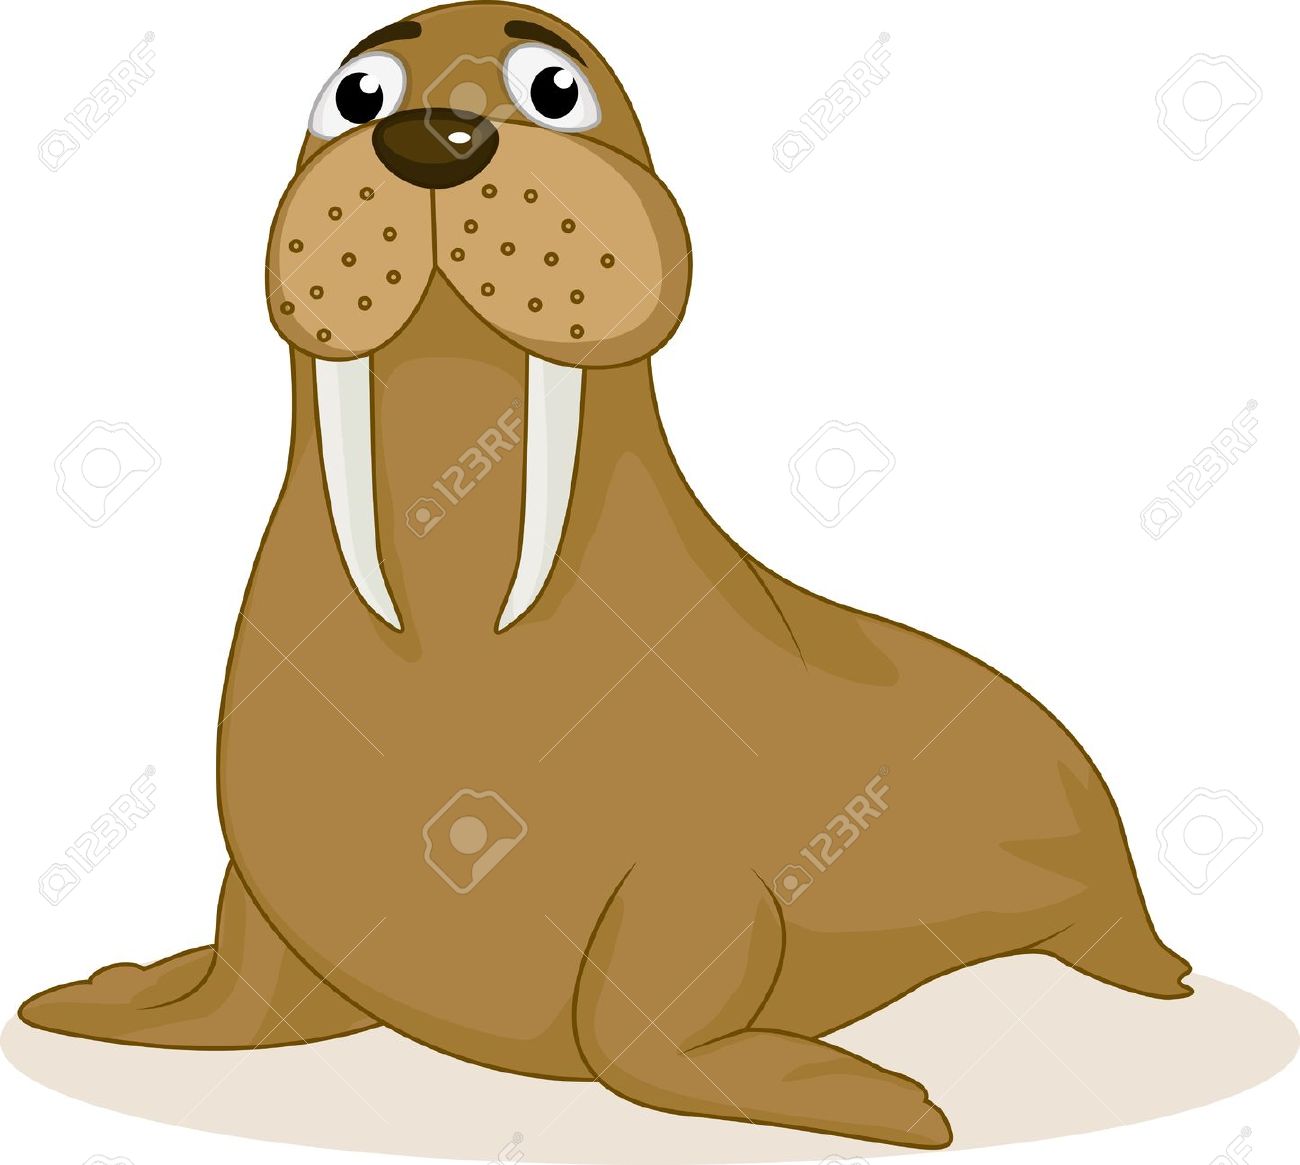 Walrus clipart #9, Download drawings